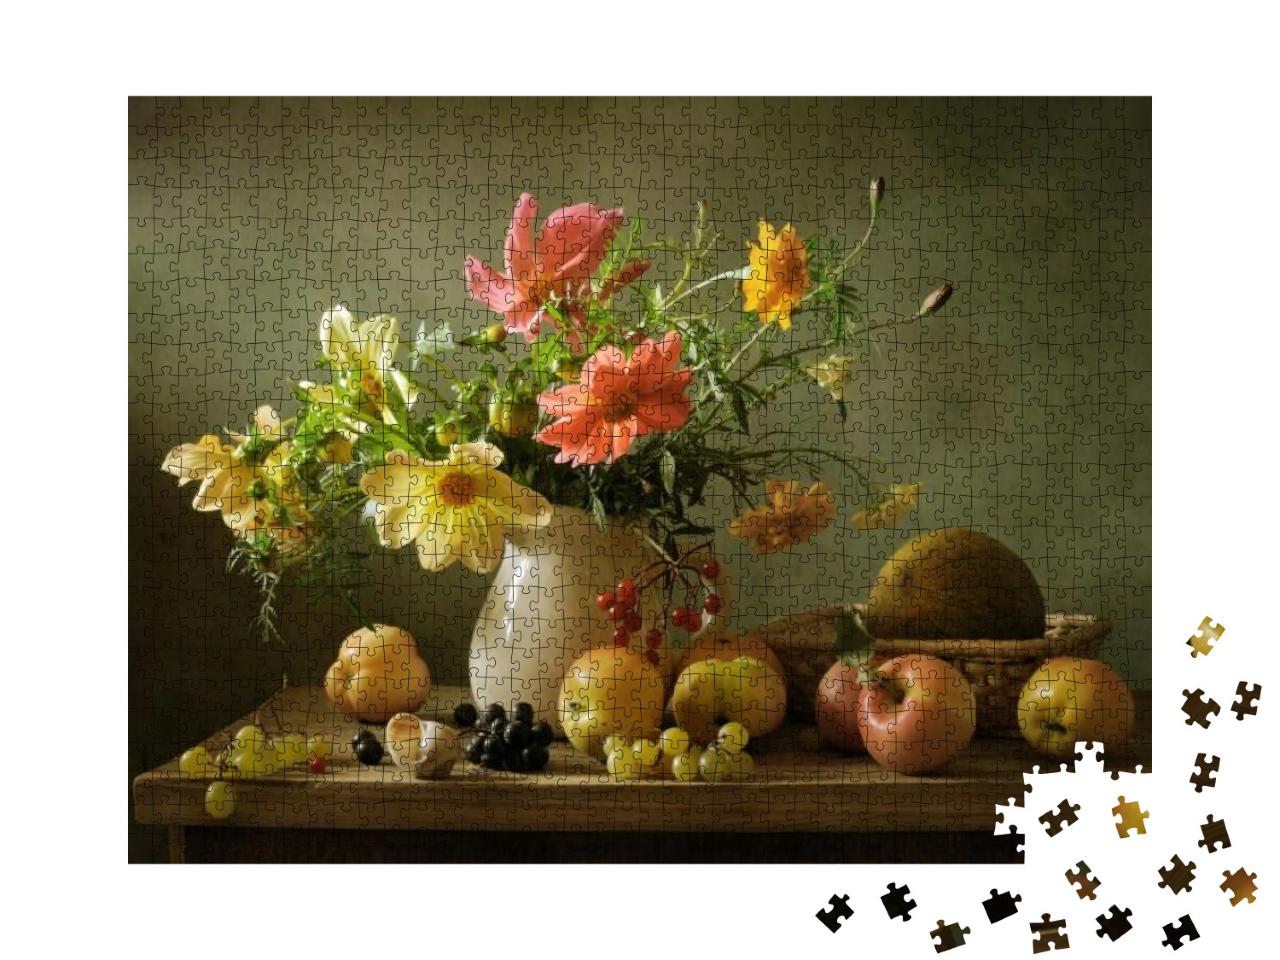 Beautiful Still Life with Flowers & Fruit... Jigsaw Puzzle with 1000 pieces